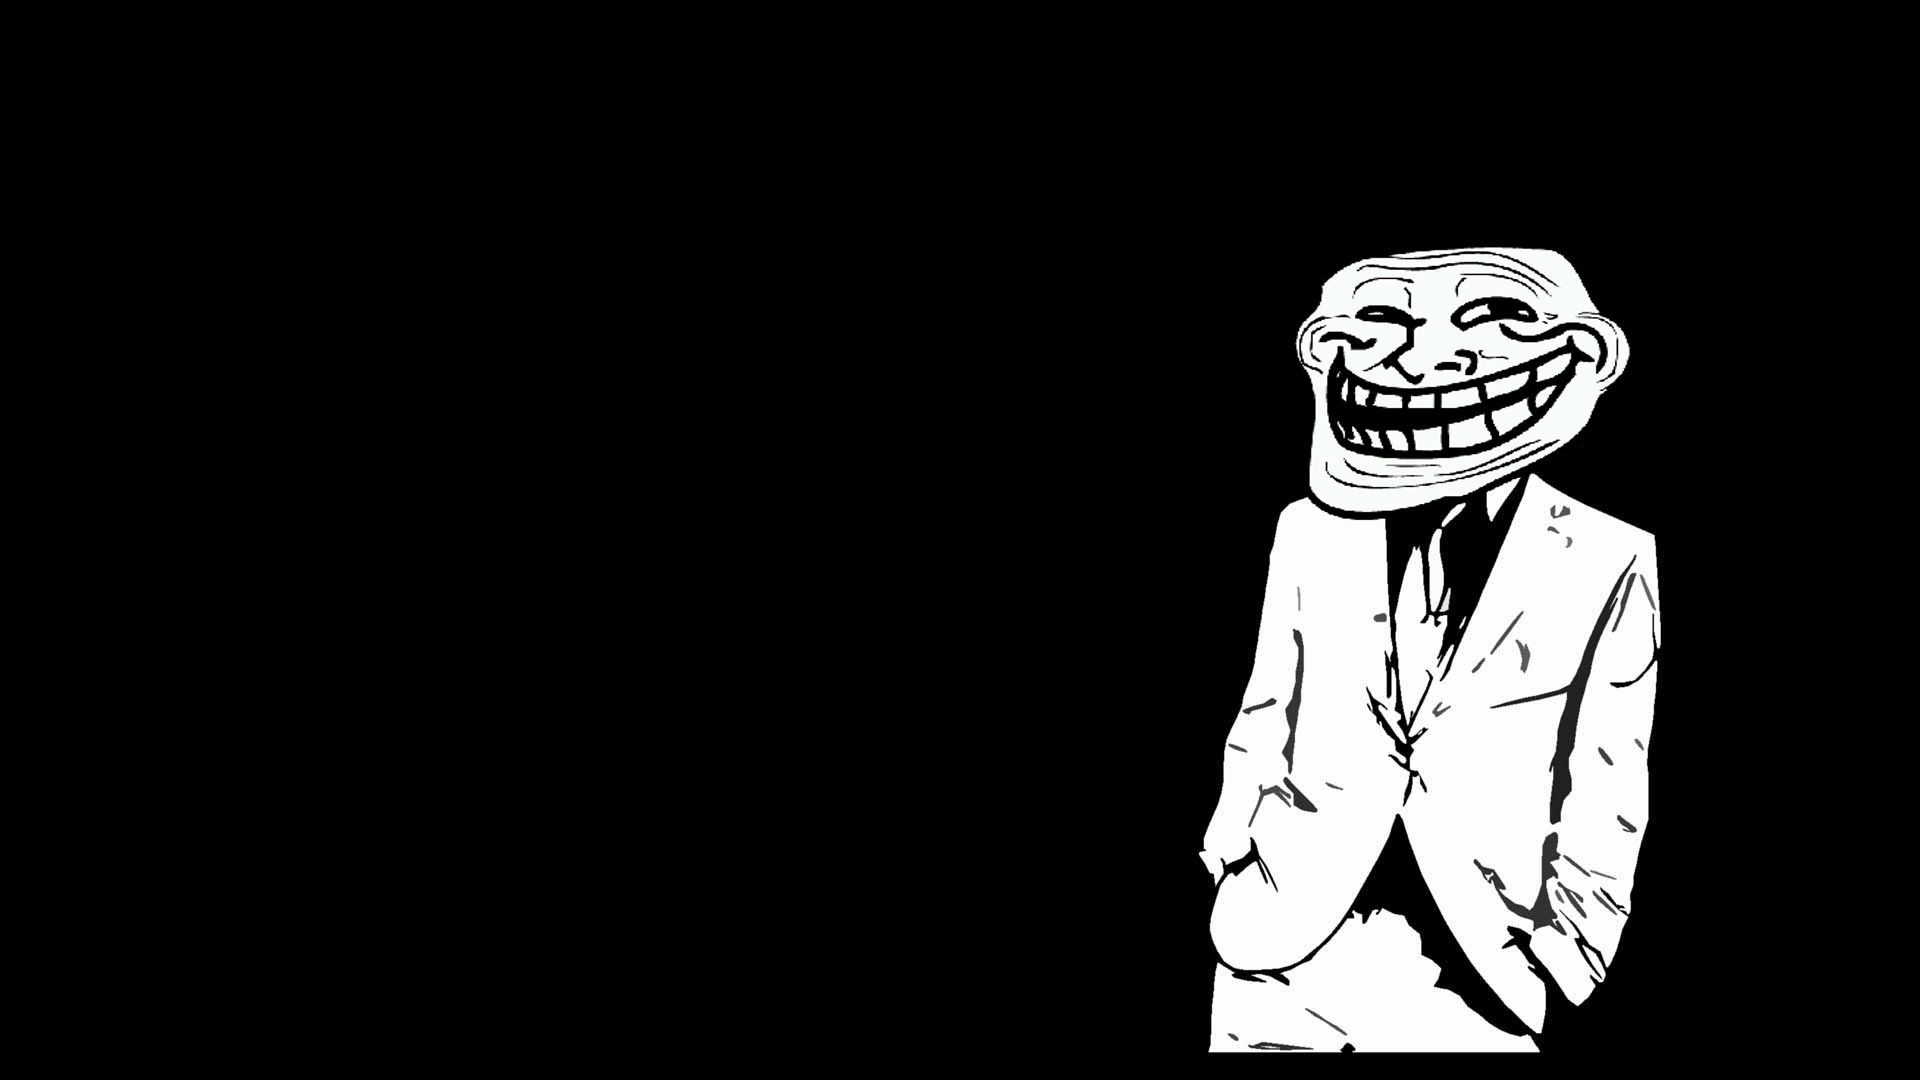 Download 50+ Troll face black background images for a humorous touch